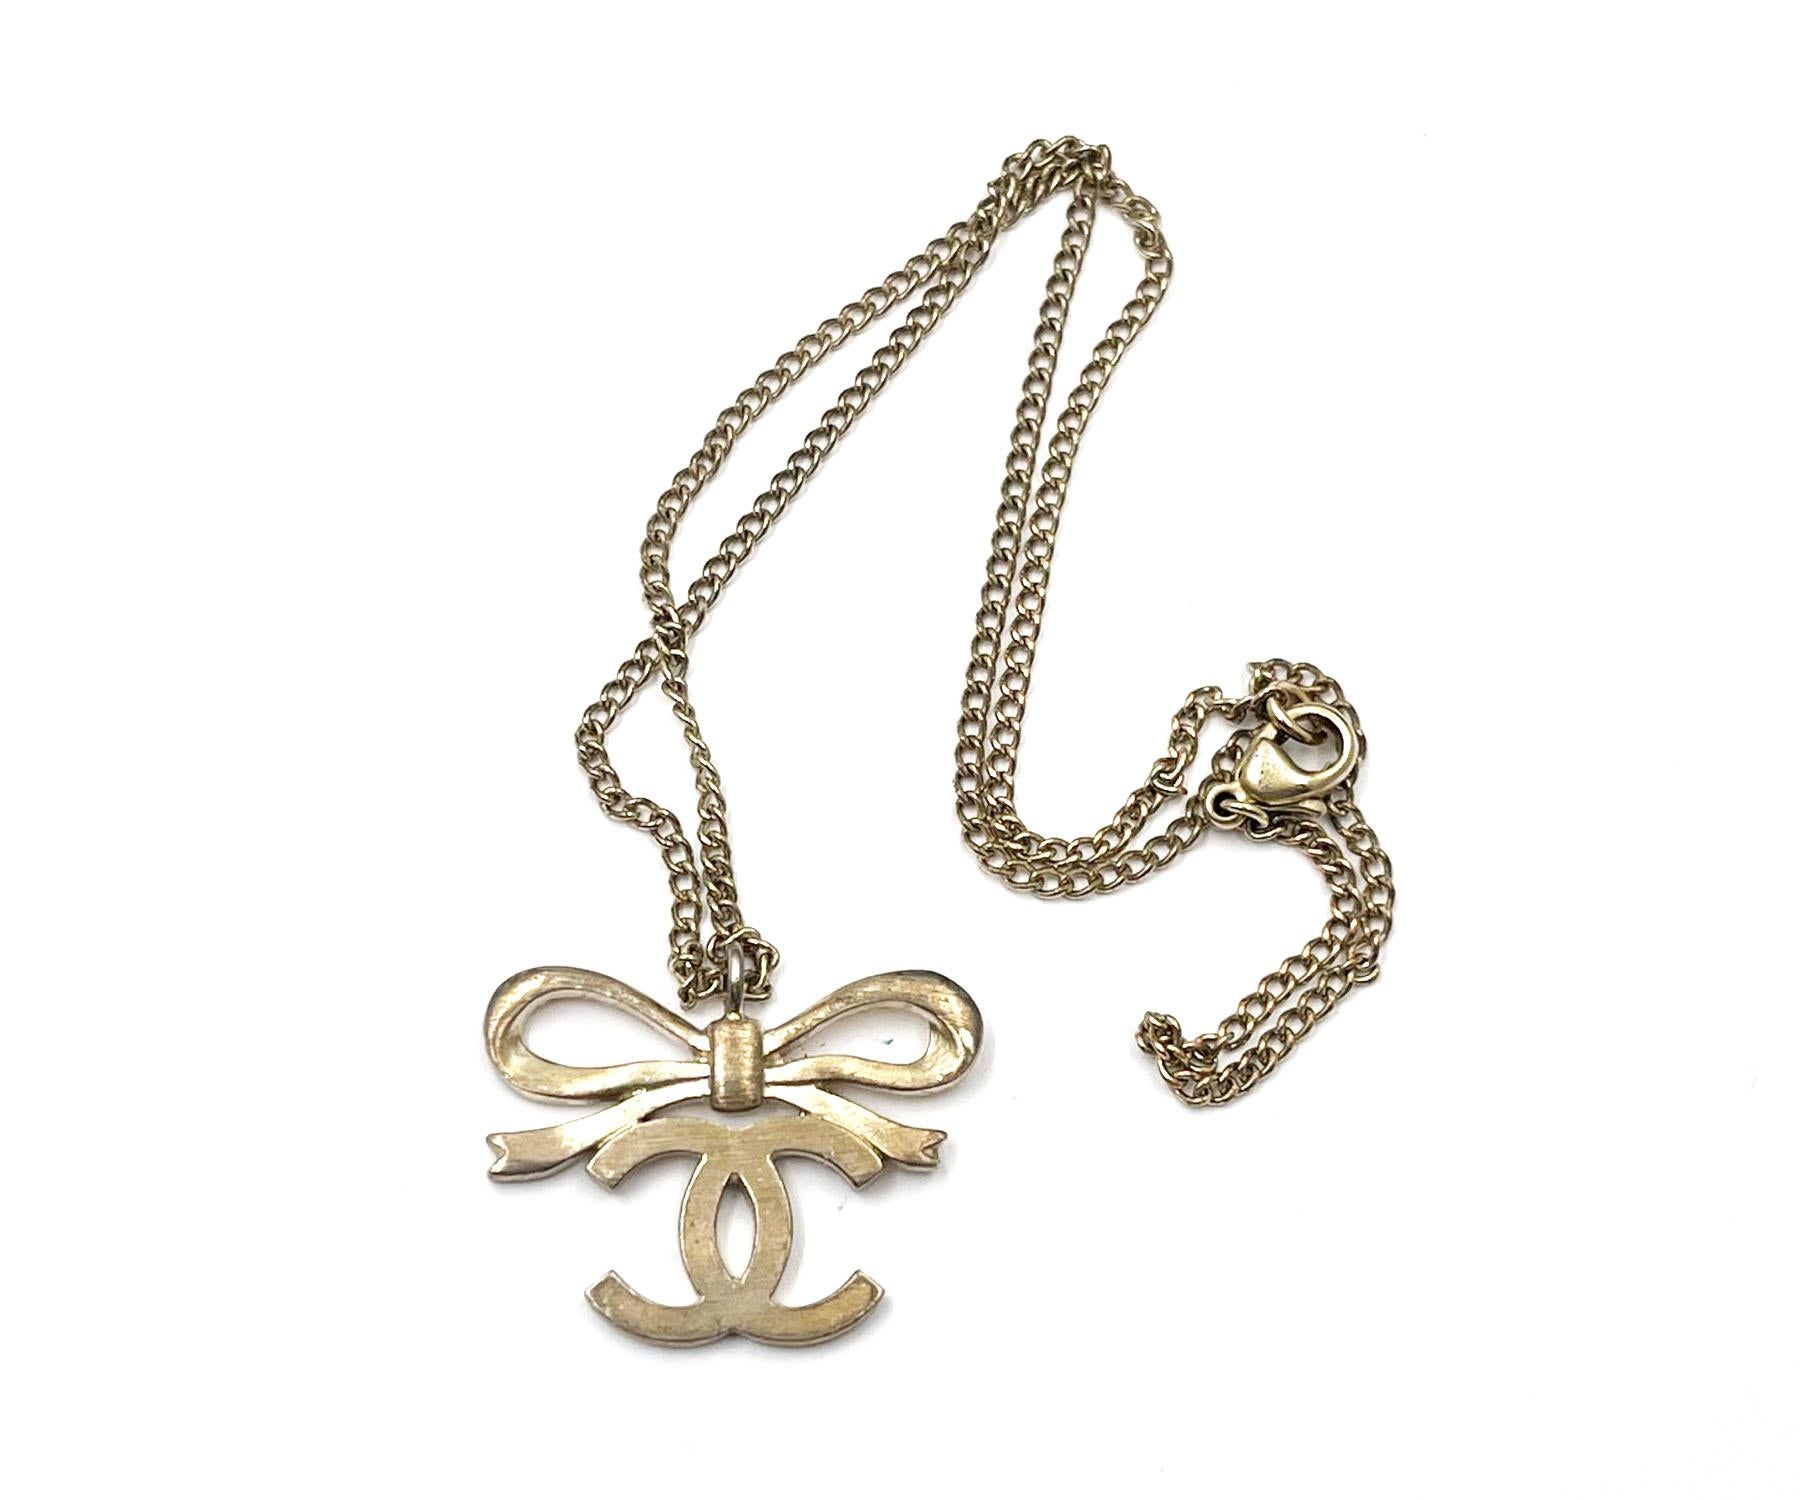 Chanel Classic Light Gold Ribbon Bow CC Necklace

*Marked 05
*Made in France

-Chain is approximately 16